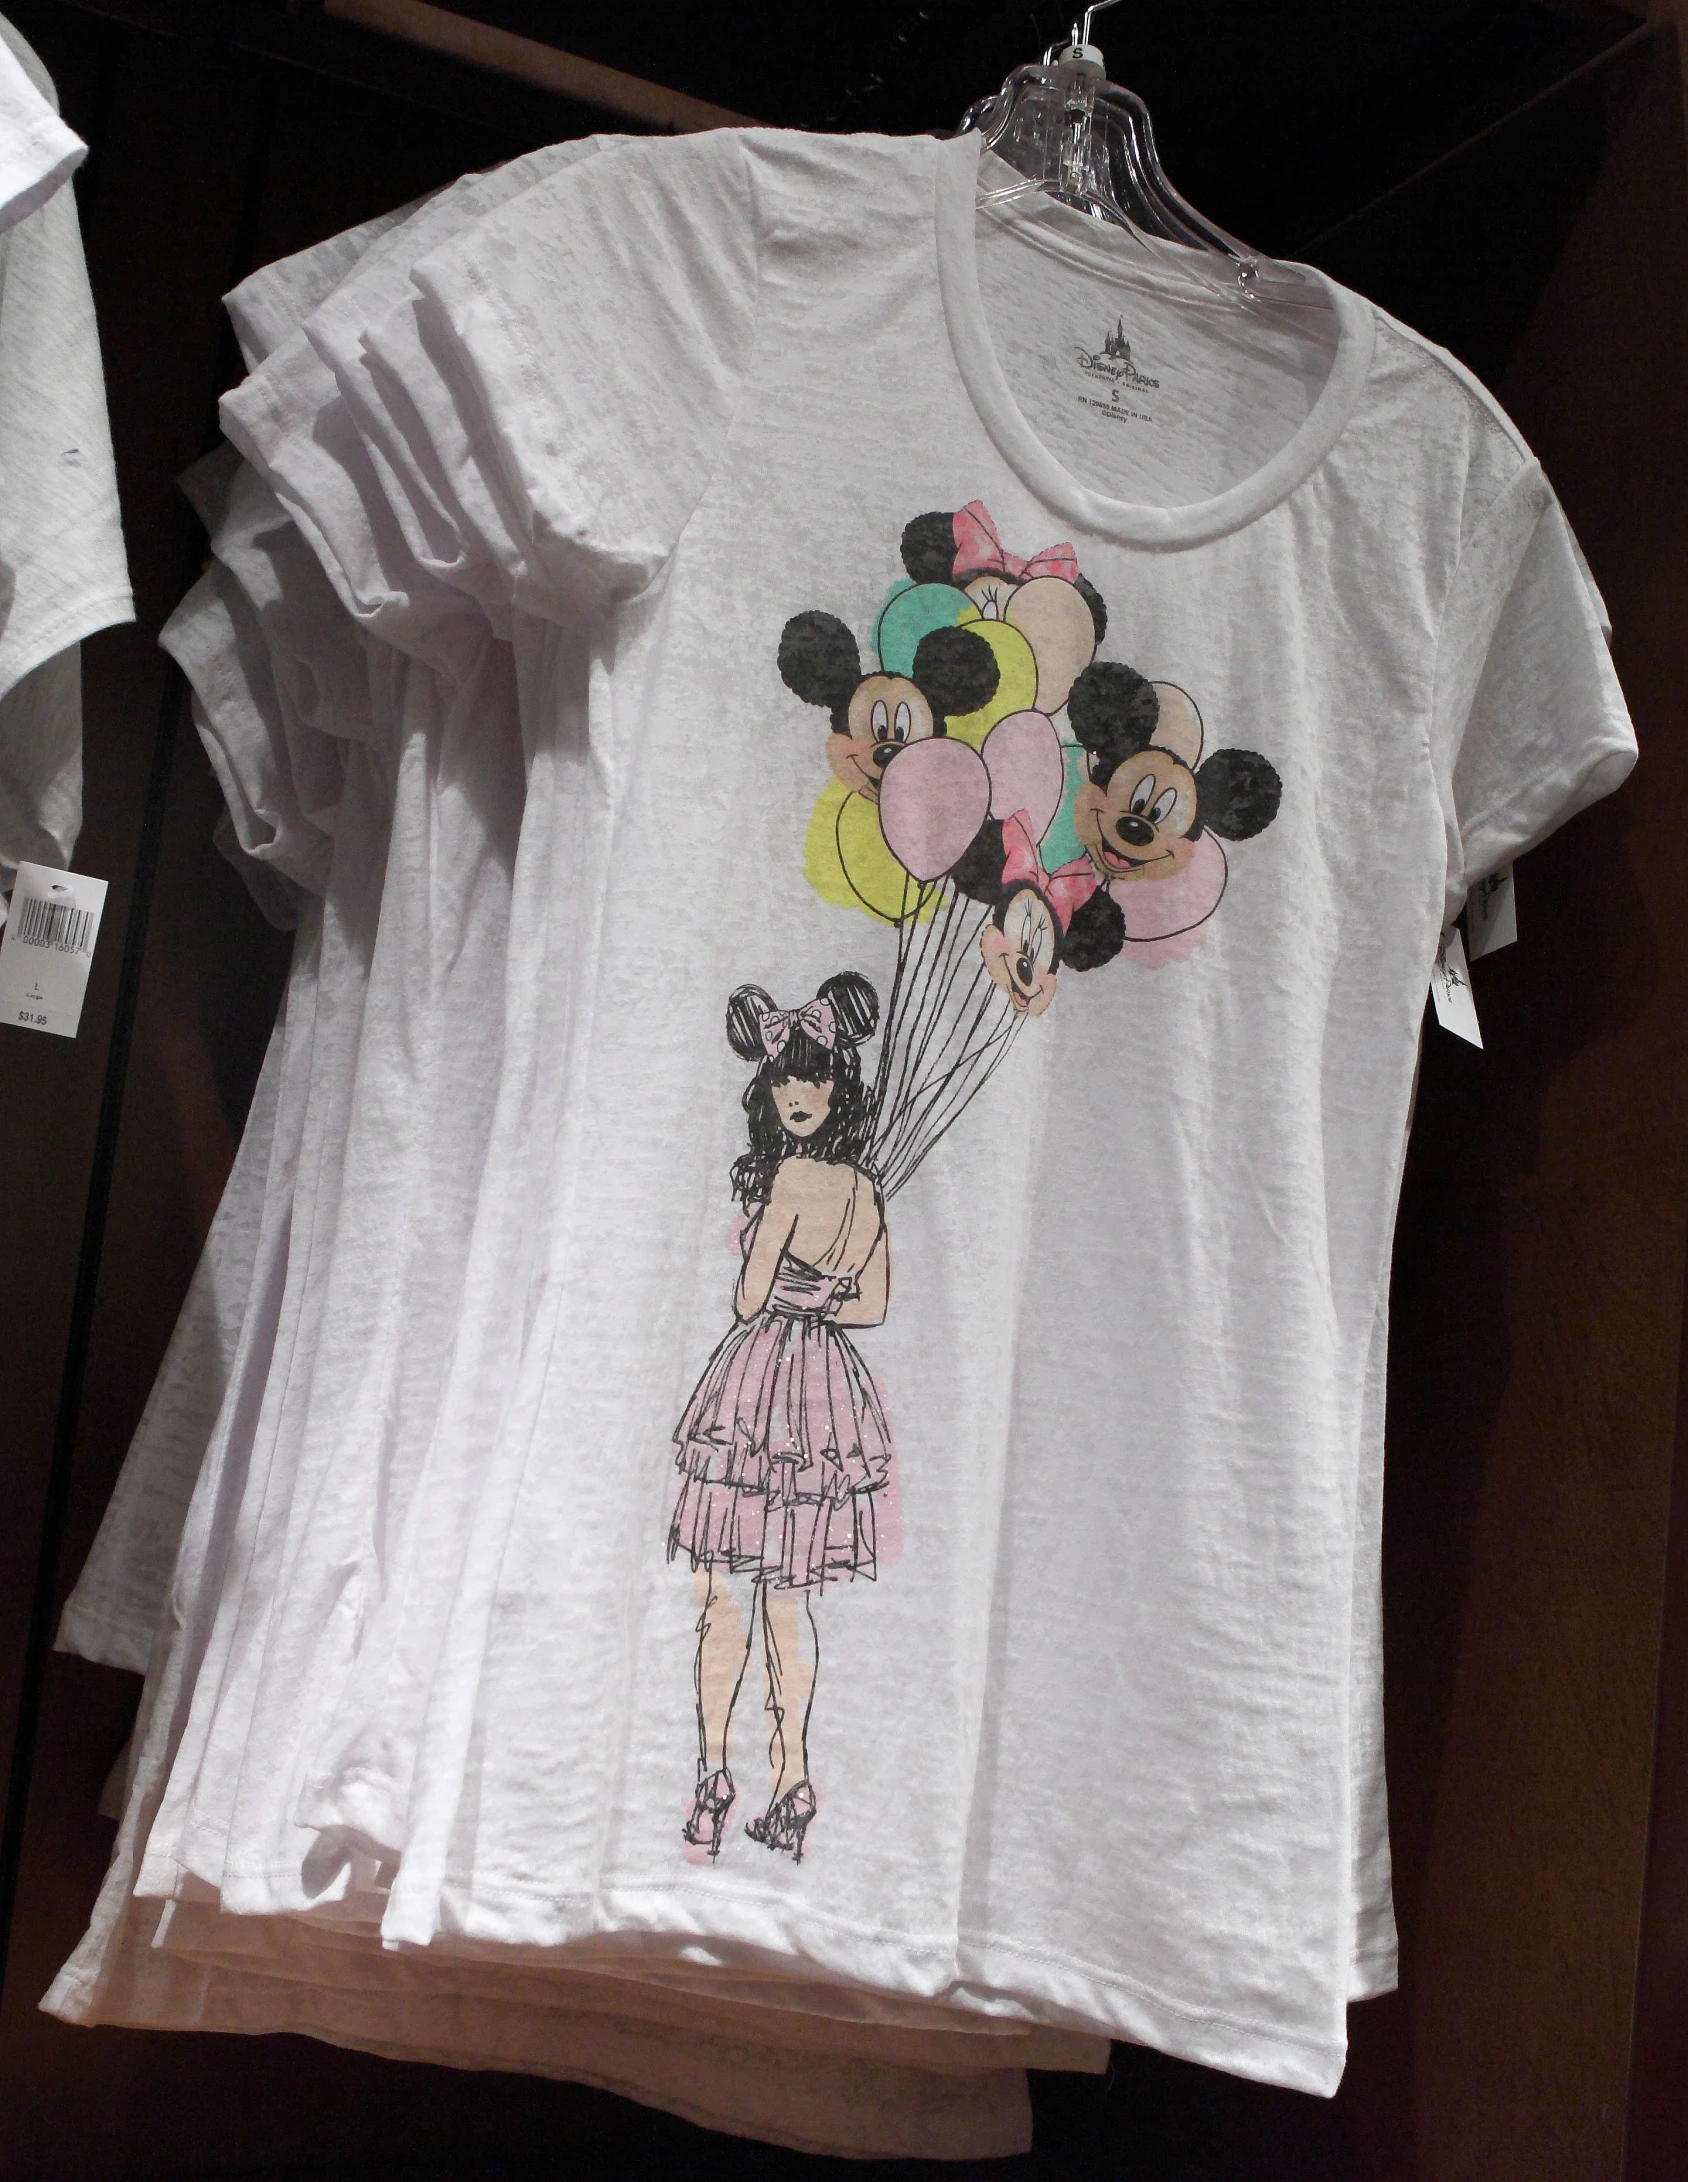 a shirt with a cartoon character holding balloons in the air